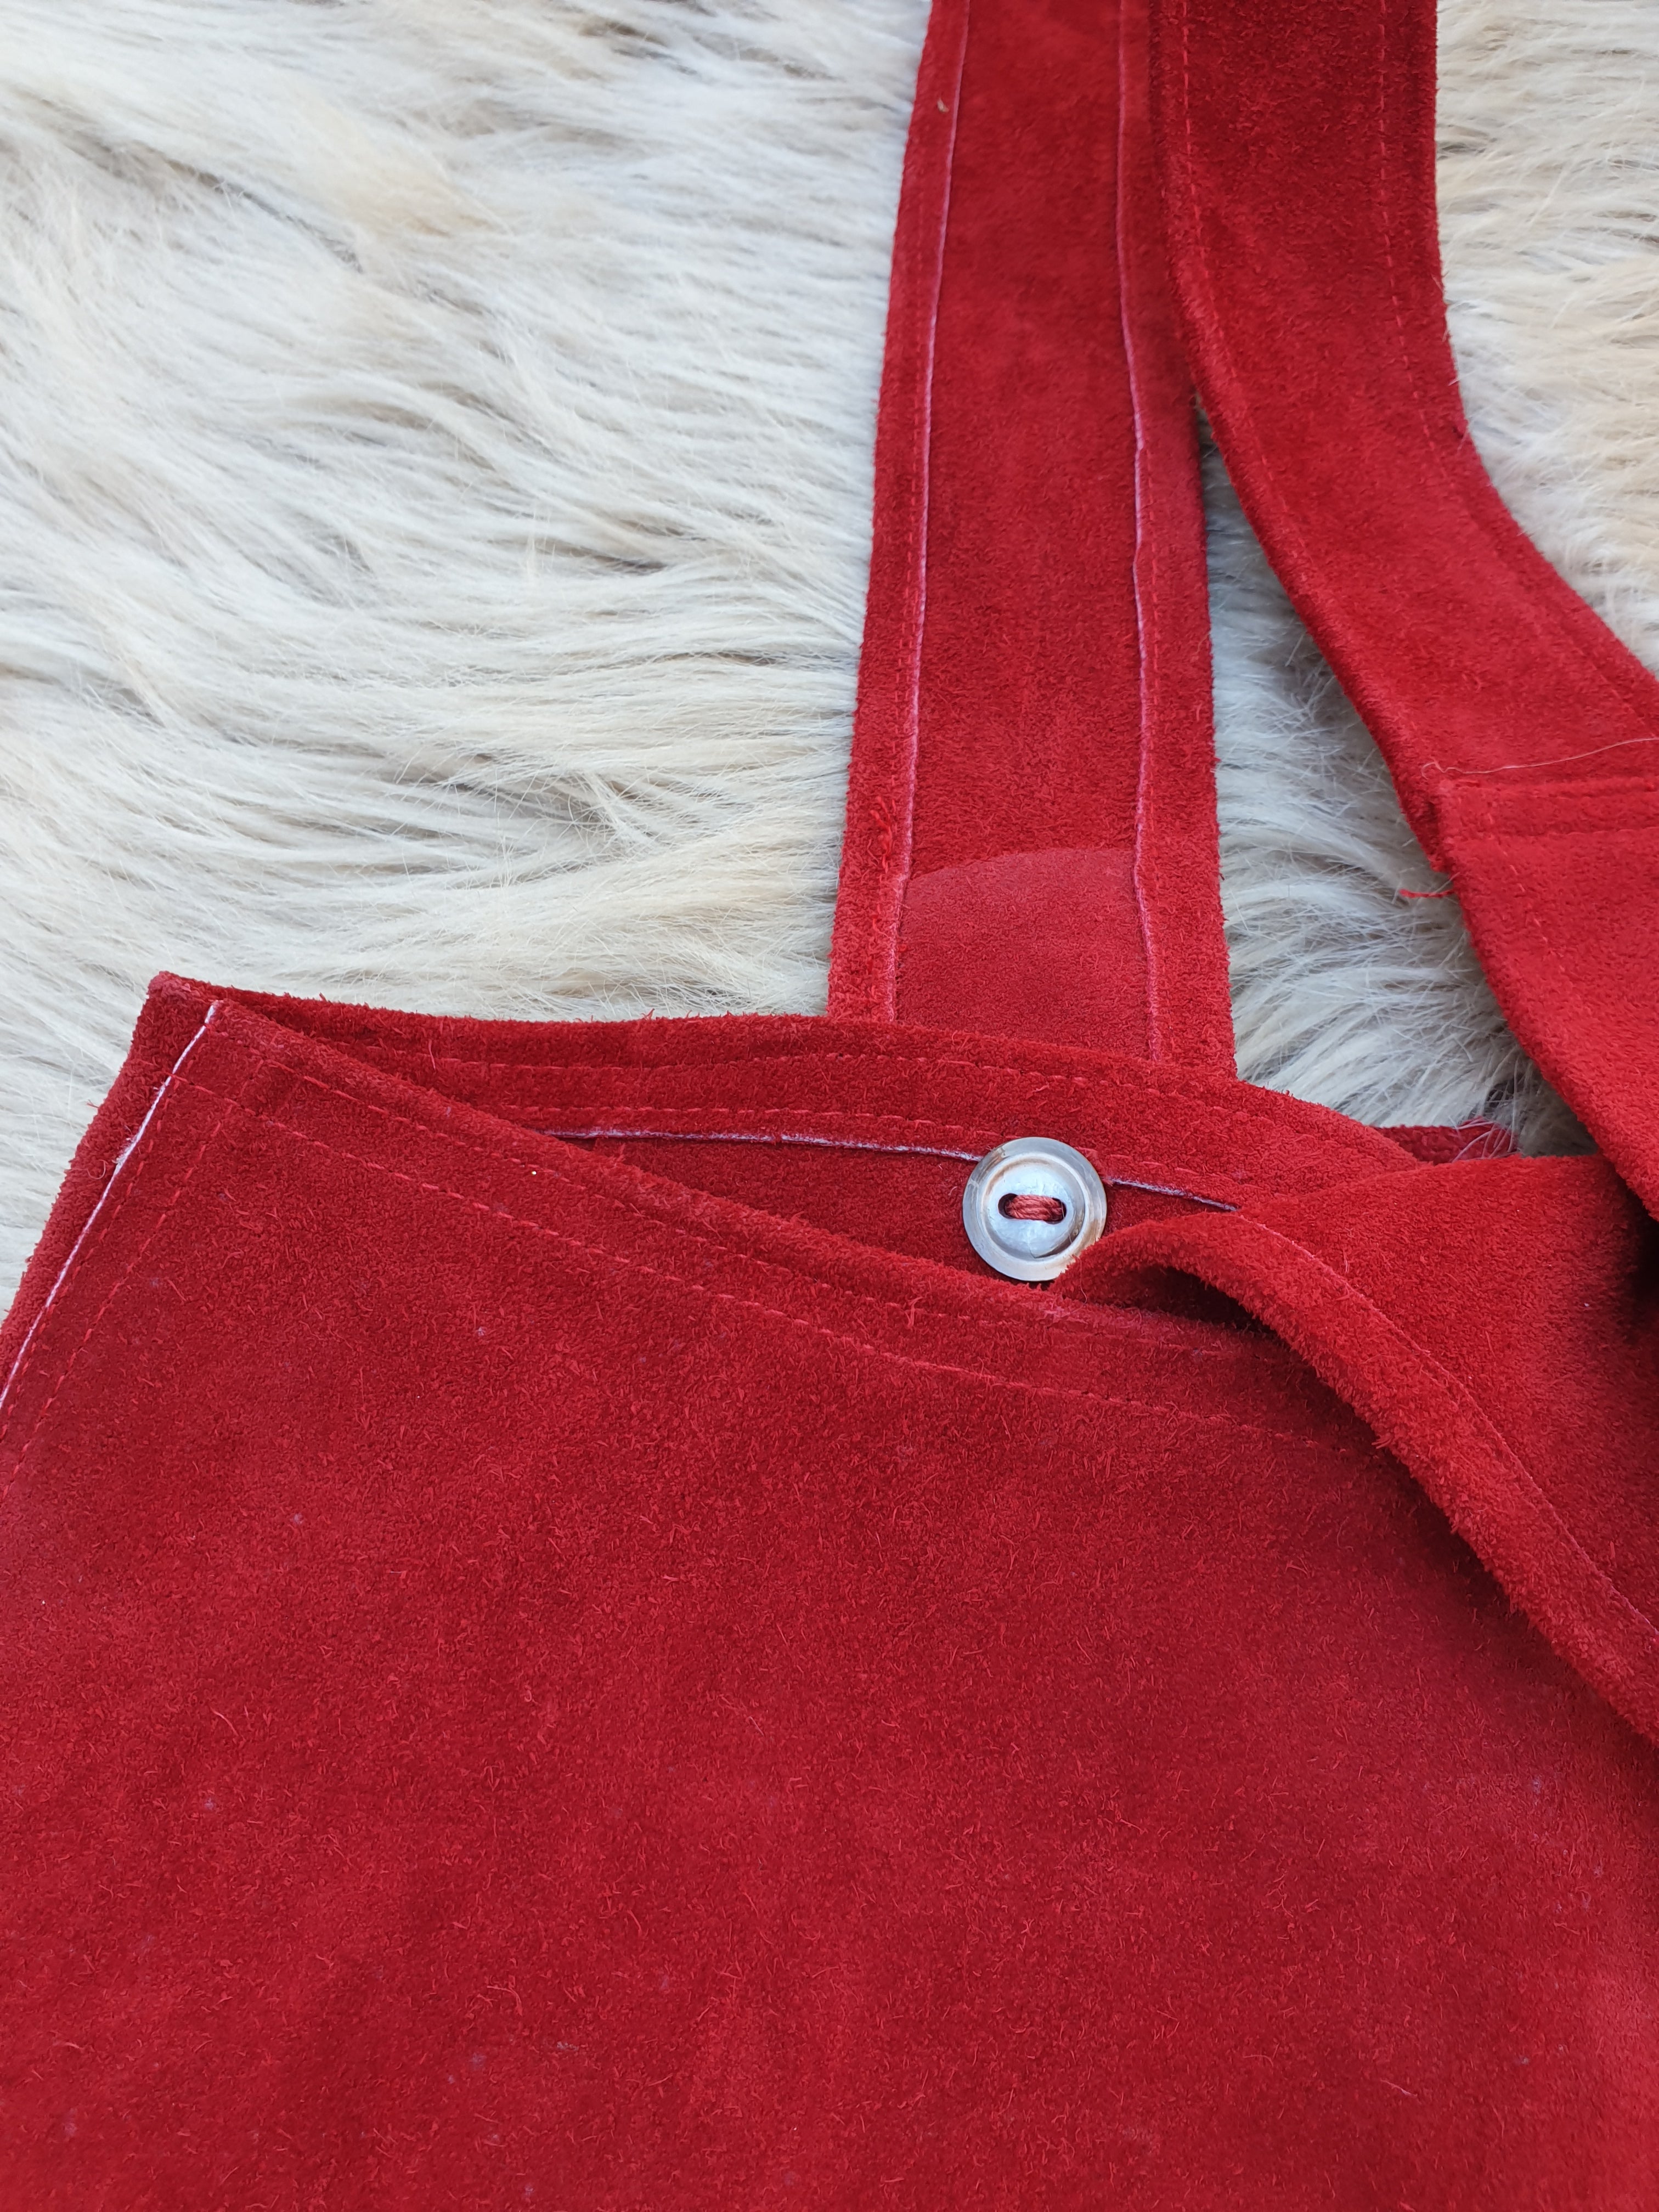 Vintage 1970s Red Suede Overalls